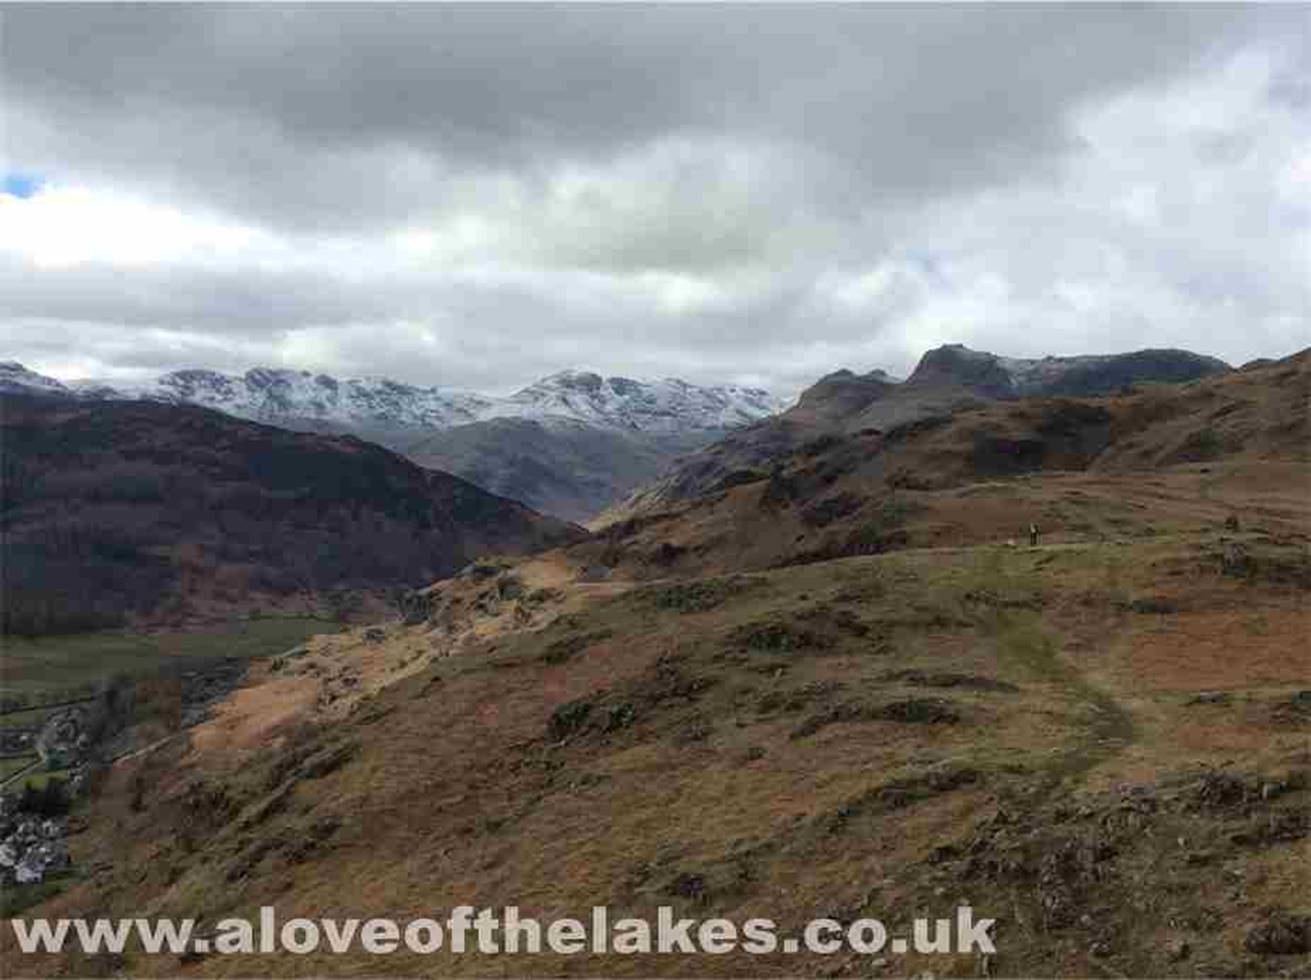 From the top of Dow Bank, a view West across to Crinkle Crags, Bowfell and the Langdale Pikes